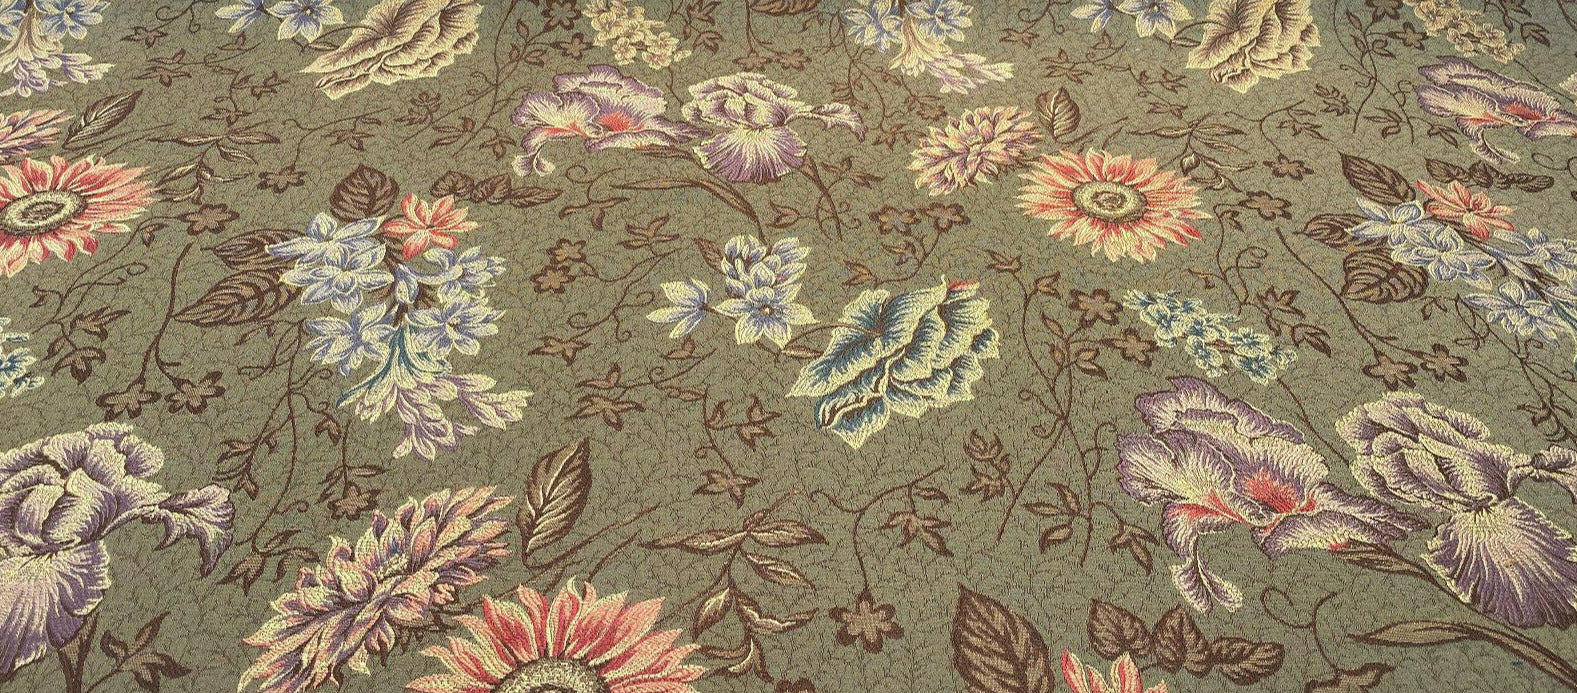 Fabric Mart Direct Chartreuse Jacquard Velvet Fabric By The Yard, 54 inches  or 137 cm width, 1 Yard Green Jacquard Fabric, Flowers Floral, Upholstery